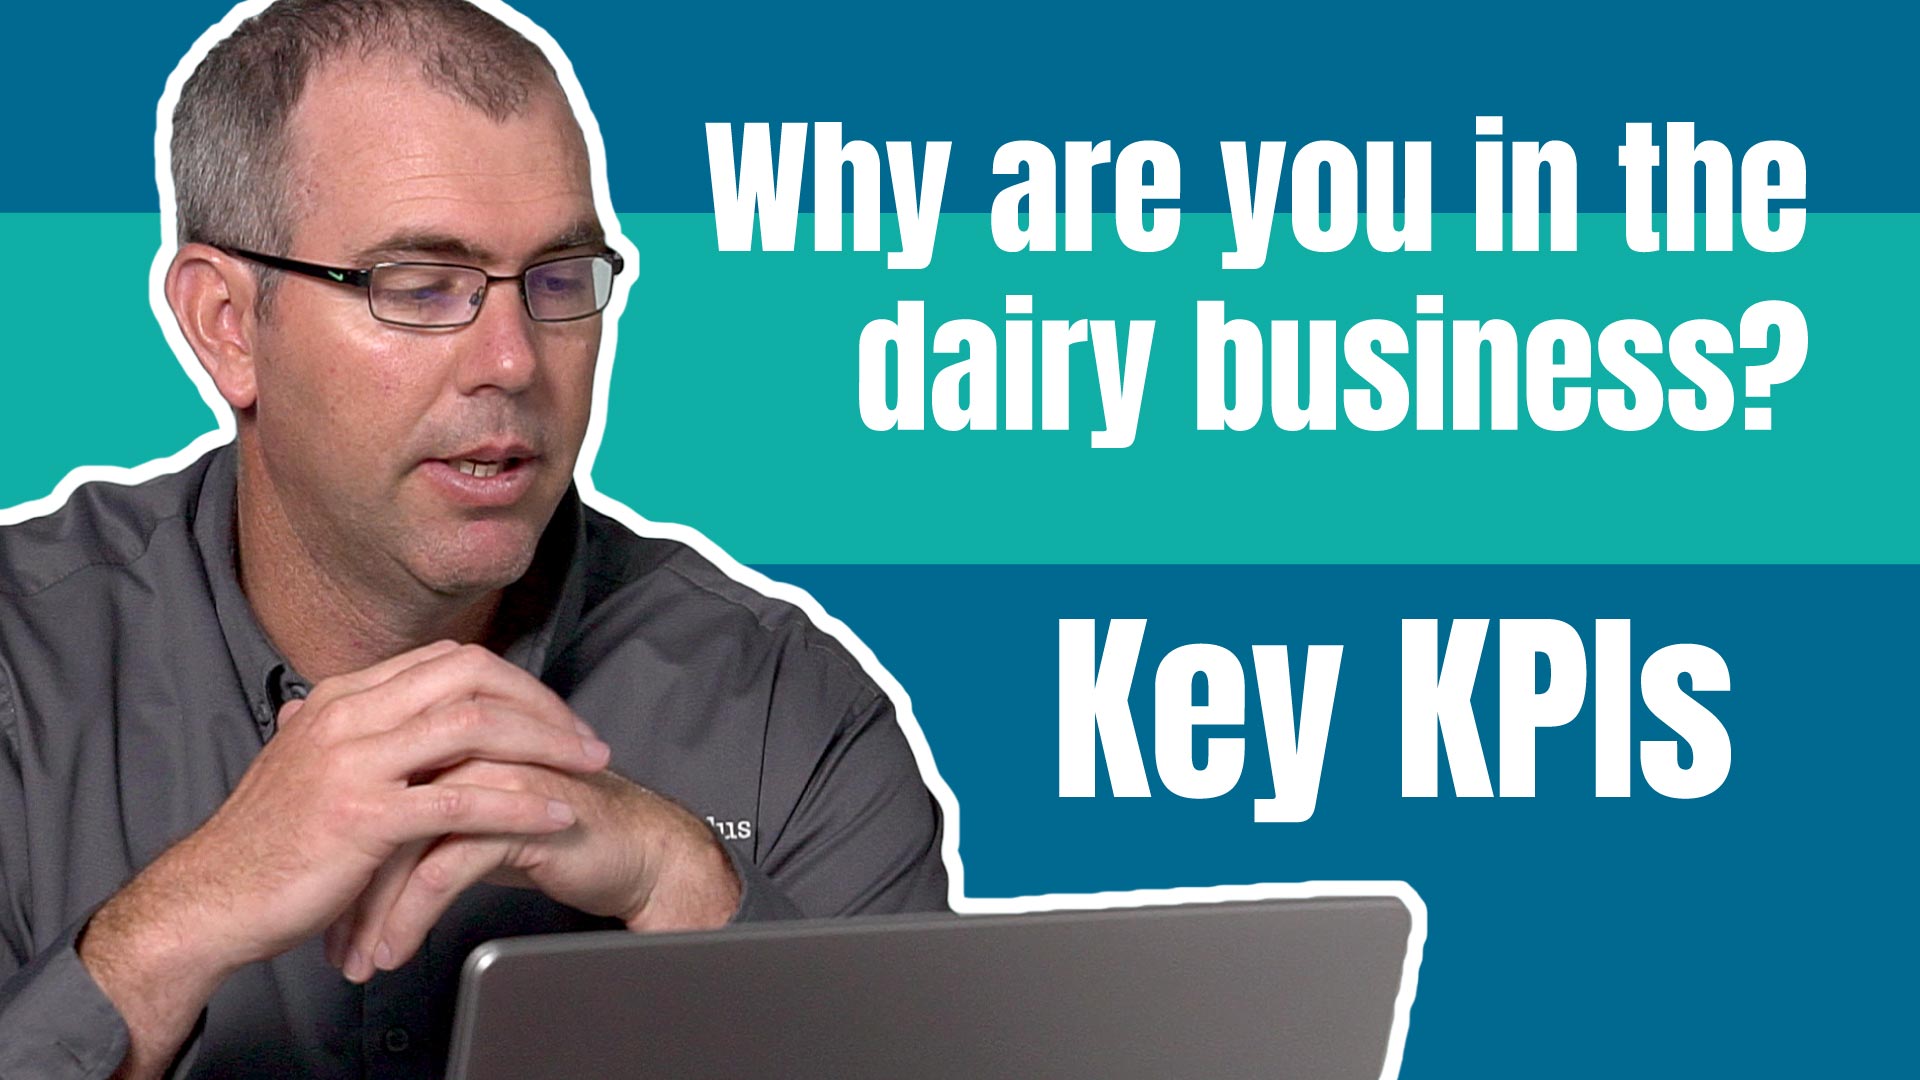 Key KPIs in the dairy industry